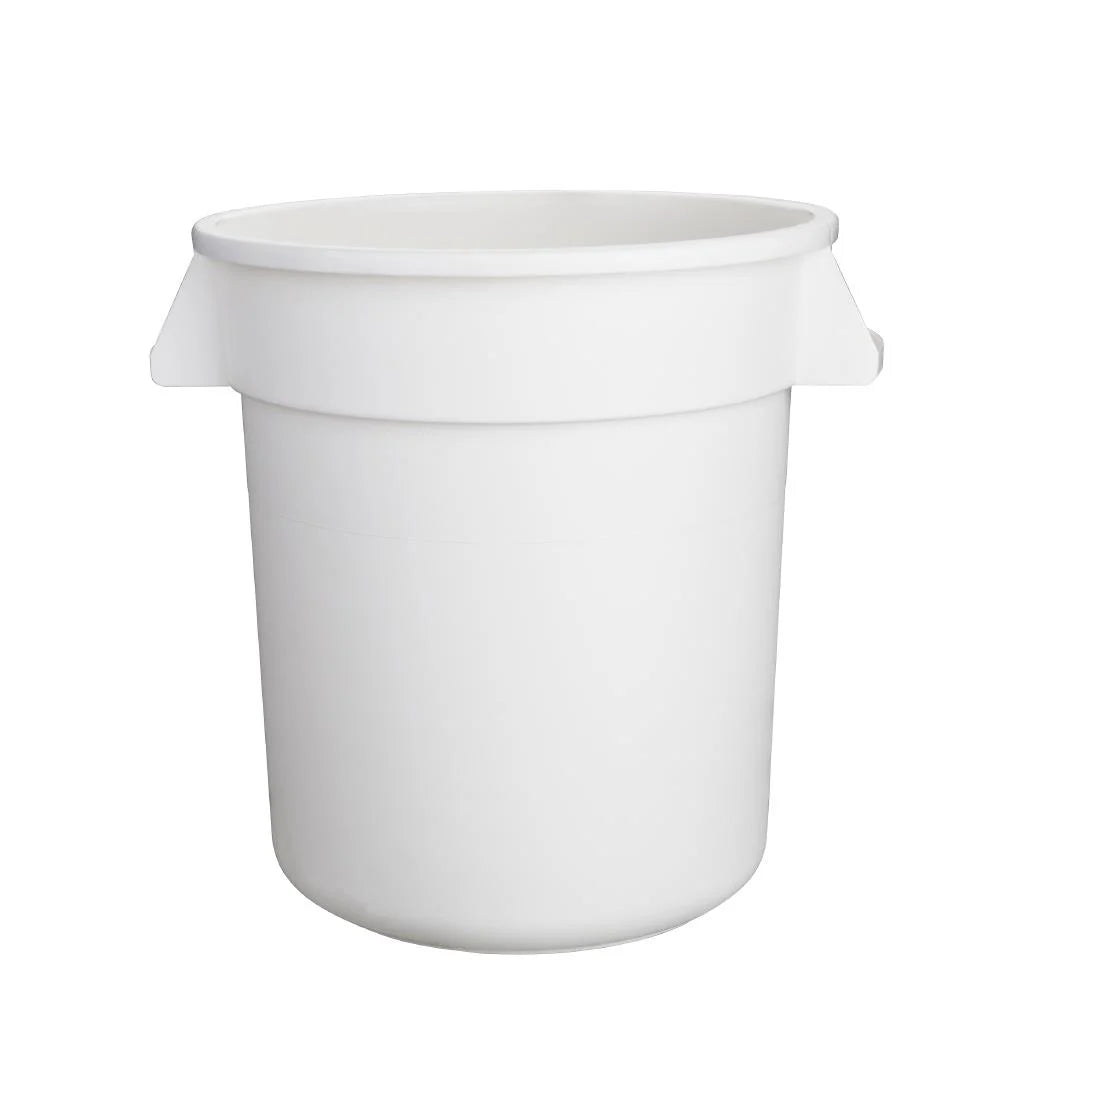 Polypropylene Round Container Bin White 76Ltr.Product Ref:00729.Model:GG793. 🚚 5-7 Days Delivery